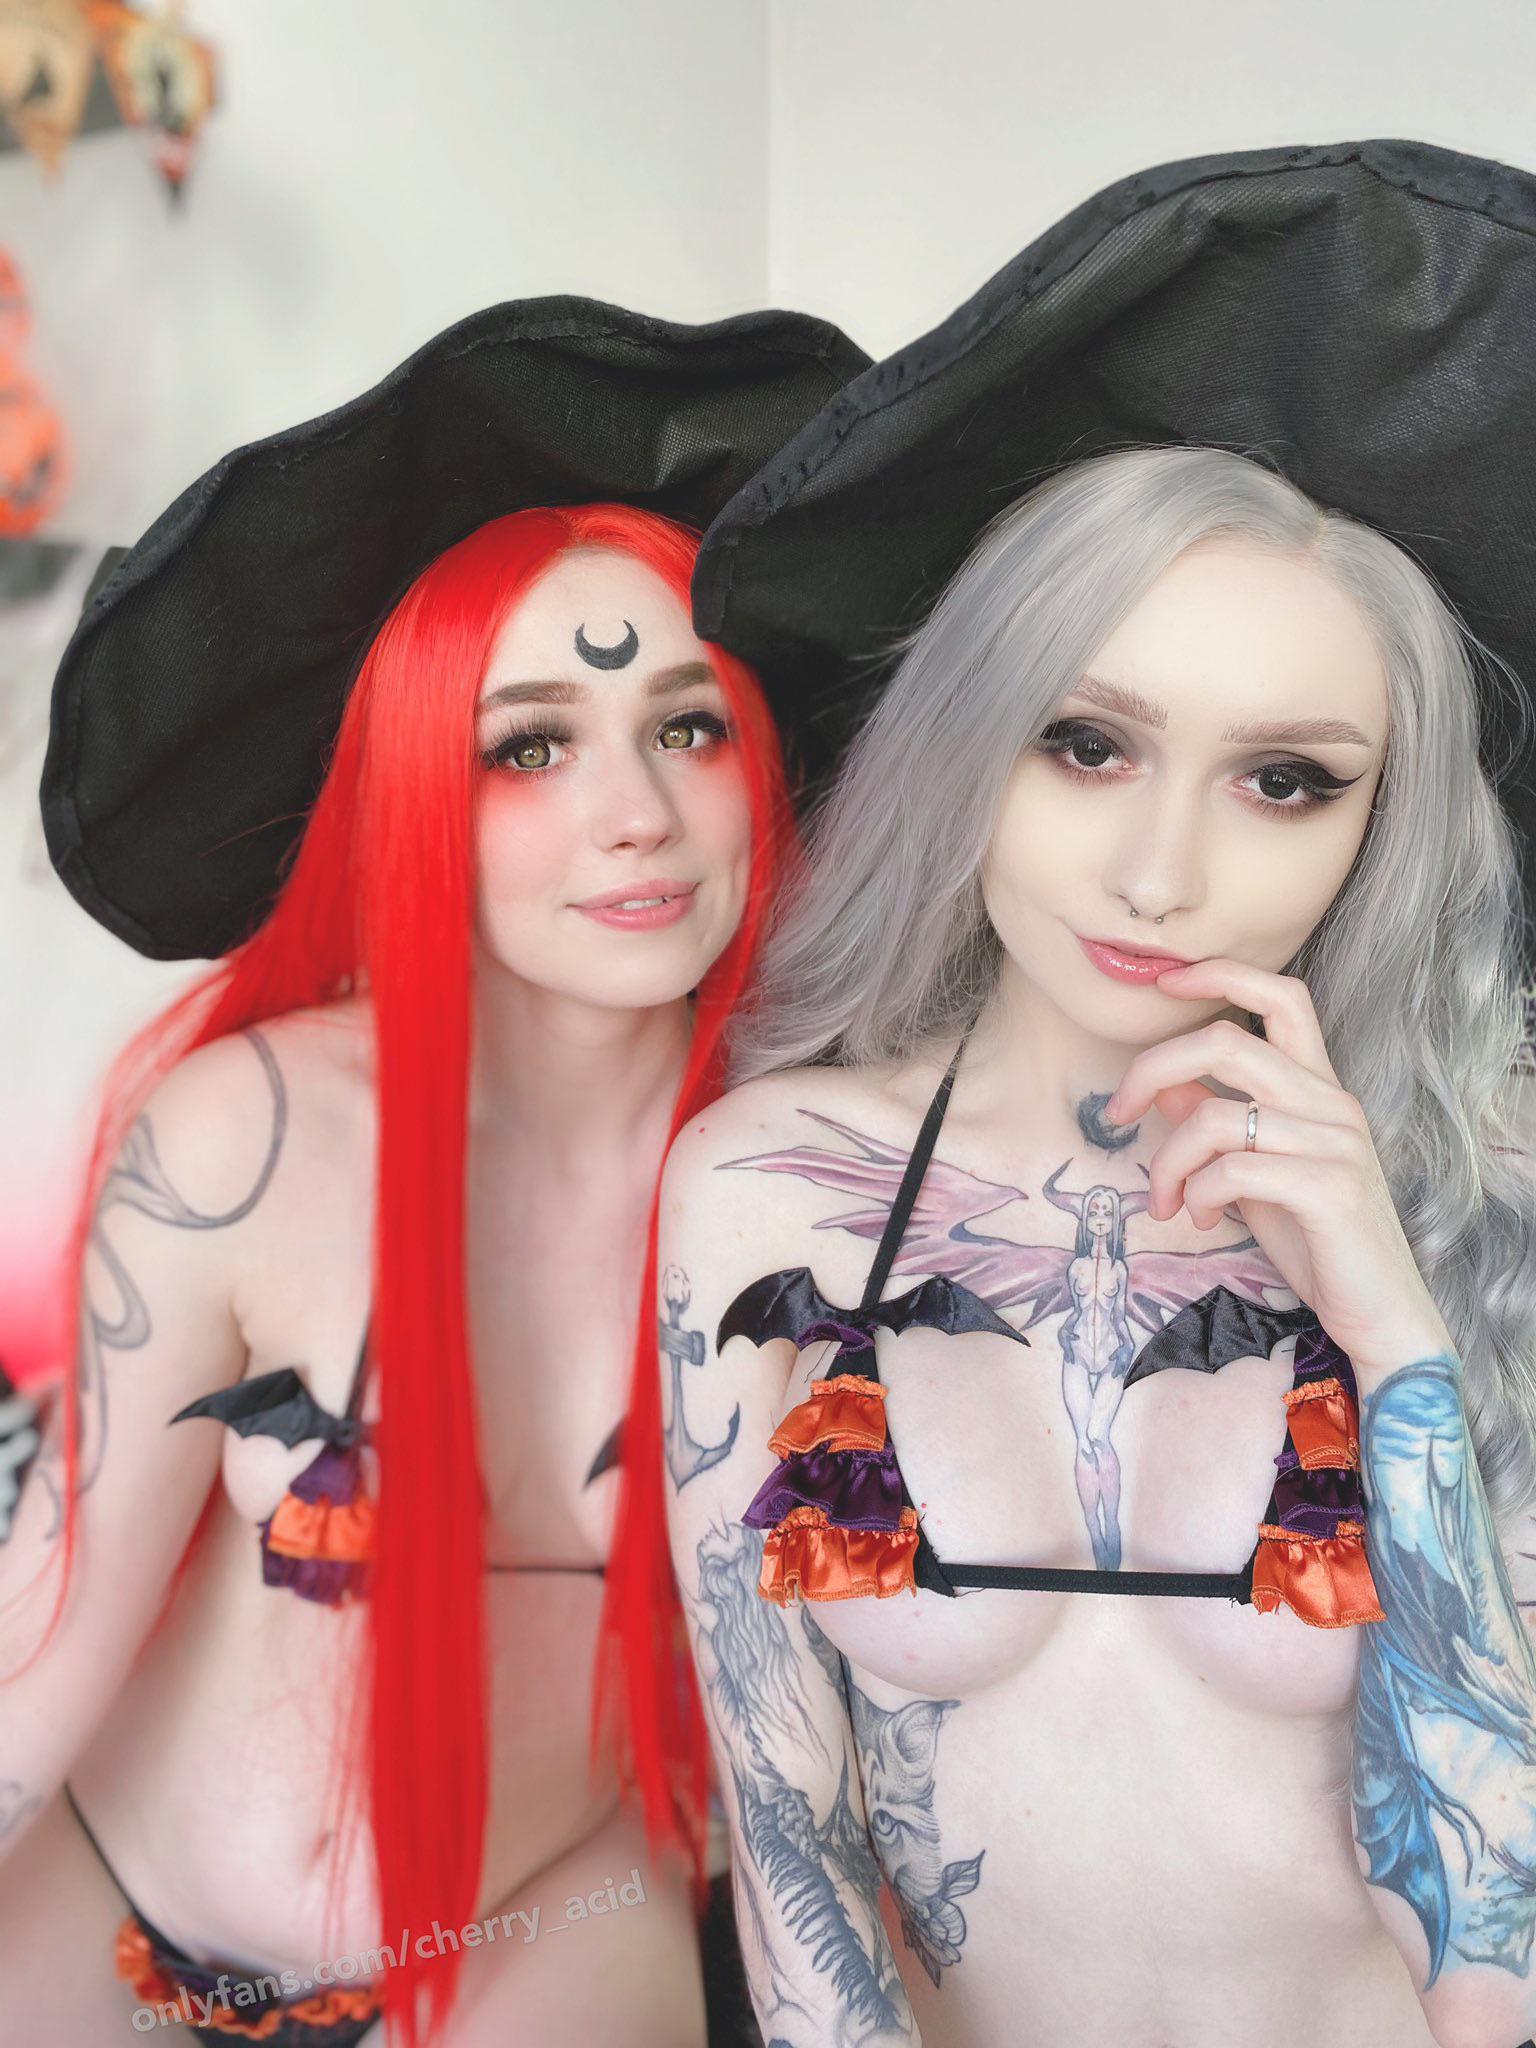 Witch Coven By Cherry_Acid And Zirael Rem